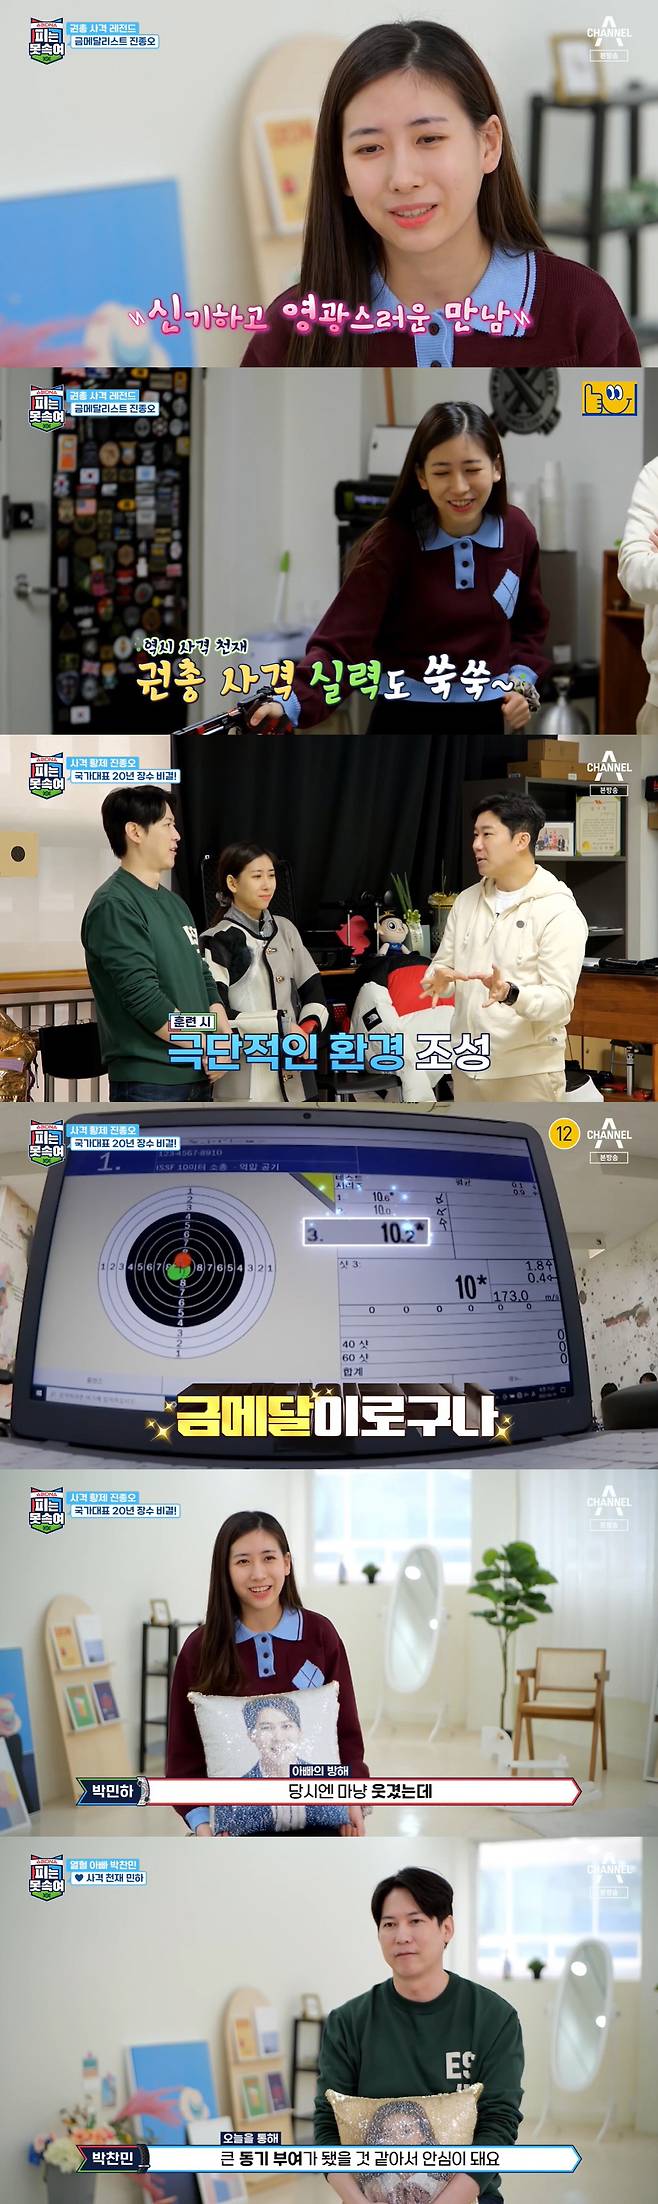 Broadcaster Park Chan-mins daughter Park Min-ha met former national shooter Jin Jong-oh.In the channel A entertainment program Super DNA blood is not cheating broadcasted on the 14th, Park Min-ha received a one-piece intel lesson from Jin Jong-oh.Park Min-ha went somewhere with Park Chan-min, saying, I have a special class. Then there was Jin Jong-oh.Jin Jong-oh is the most medalist in the Korean shooting world, who has played five times in the Olympics for 20 years as a national representative.Park Min-ha said, You are a great senior and you have won many medals in my dream Olympics. It is a wonderful and honorable feeling to see entertainers.Jin Jong-oh said, I want to explain the selection process of the national team, although the main event is different.Park Min-ha said with a languid look, I am going to ask you a lot about the pistol, so I have a lot of questions about the pistol.Park Min-ha started shooting with a pistol, not the usual rifle, and as Jin Jong-ohs honey tips were added, his skills quickly increased and he scored 10 points in three challenges.Jin Jong-oh praised it, calling it a born-on-the-go DNA.Jin Jong-oh added to Park Min-ha that I need my own mental management and I am sensitive to external factors (in the game), so it will be helpful to make obstacles during training.He then used the actual vuvuzela to train his concentration. Park Min-ha scored 10.2 points in the interfering maneuver and received applause.After the training, Park Min-ha said, I was funny at the time, but when I was training, I thought that I could do well regardless of the environment even if I went to a big tournament later.Park Chan-min said, I wanted to be a father because I was interested in shooting, but I feel relieved that it was a great motivation.There was also time for Jin Jong-oh and Park Min-ha alone, who asked, Usually athletes are the goal of Olympic gold medal, but what is Minhas goal?Park Min-ha said, The goal is to compete in the world junior championships and the final goal is to participate in the Olympics. I want to go to the Paris Olympics as the youngest national team.Jin Jong-oh gave the courage, saying, I think theres enough possibility - Im going!Park Min-ha confessed to the slump, saying, Until recently, the practice record was good. I had a record of the first place in the high school, but the record fell in the morning.I think people are interested in shooting while playing a child actor, and it seems to be a burden. How to overcome it.Jin Jong-oh wrote a training log, advised me to carefully record the training contents, and to forget the negative things.Lee Dong-guks brother and sister visited the screen golf course. Jae-a, who had undergone surgery due to a knee injury, said, I am tired because I am not at home after surgery.I saw Jash, Sua, SuA, Cyan playing golf, but he was so good. I do not want to be behind. A few moments later, Jash, Jaa (hereinafter Jasia), and Seolah, SuA, and Cyan (hereinafter Sulsudae) played golf battles.When the Jascia team won, Cyan showed tears. When Jasie threw a joke, Im sorry I was so good, Cyan, Cyan even buried his face in his clothes.